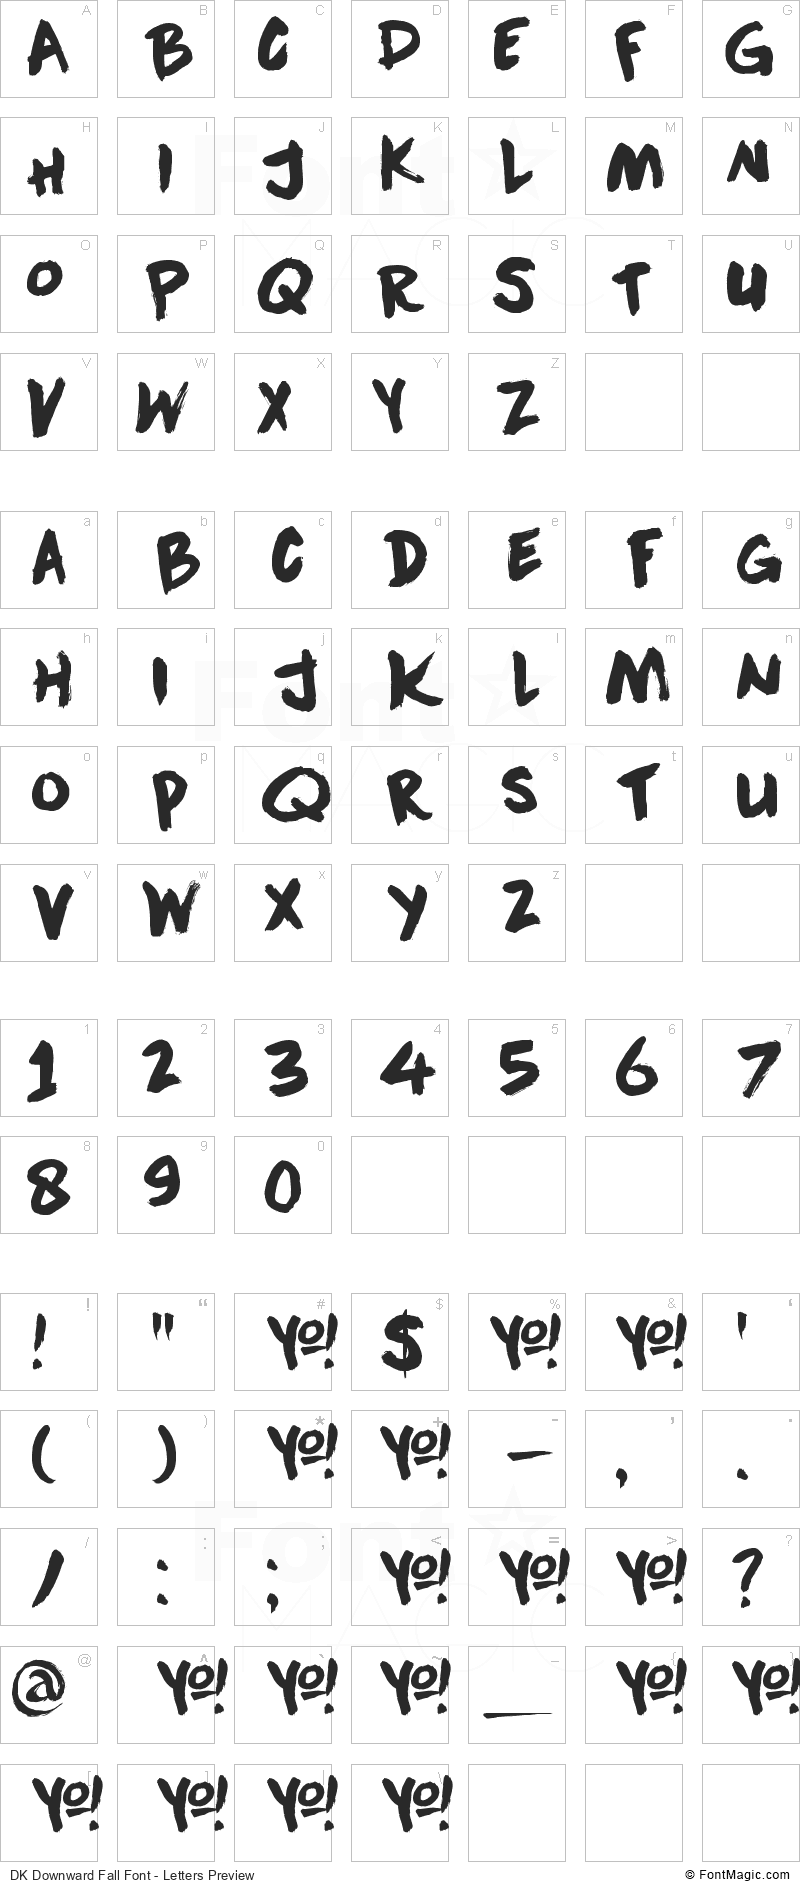 DK Downward Fall Font - All Latters Preview Chart